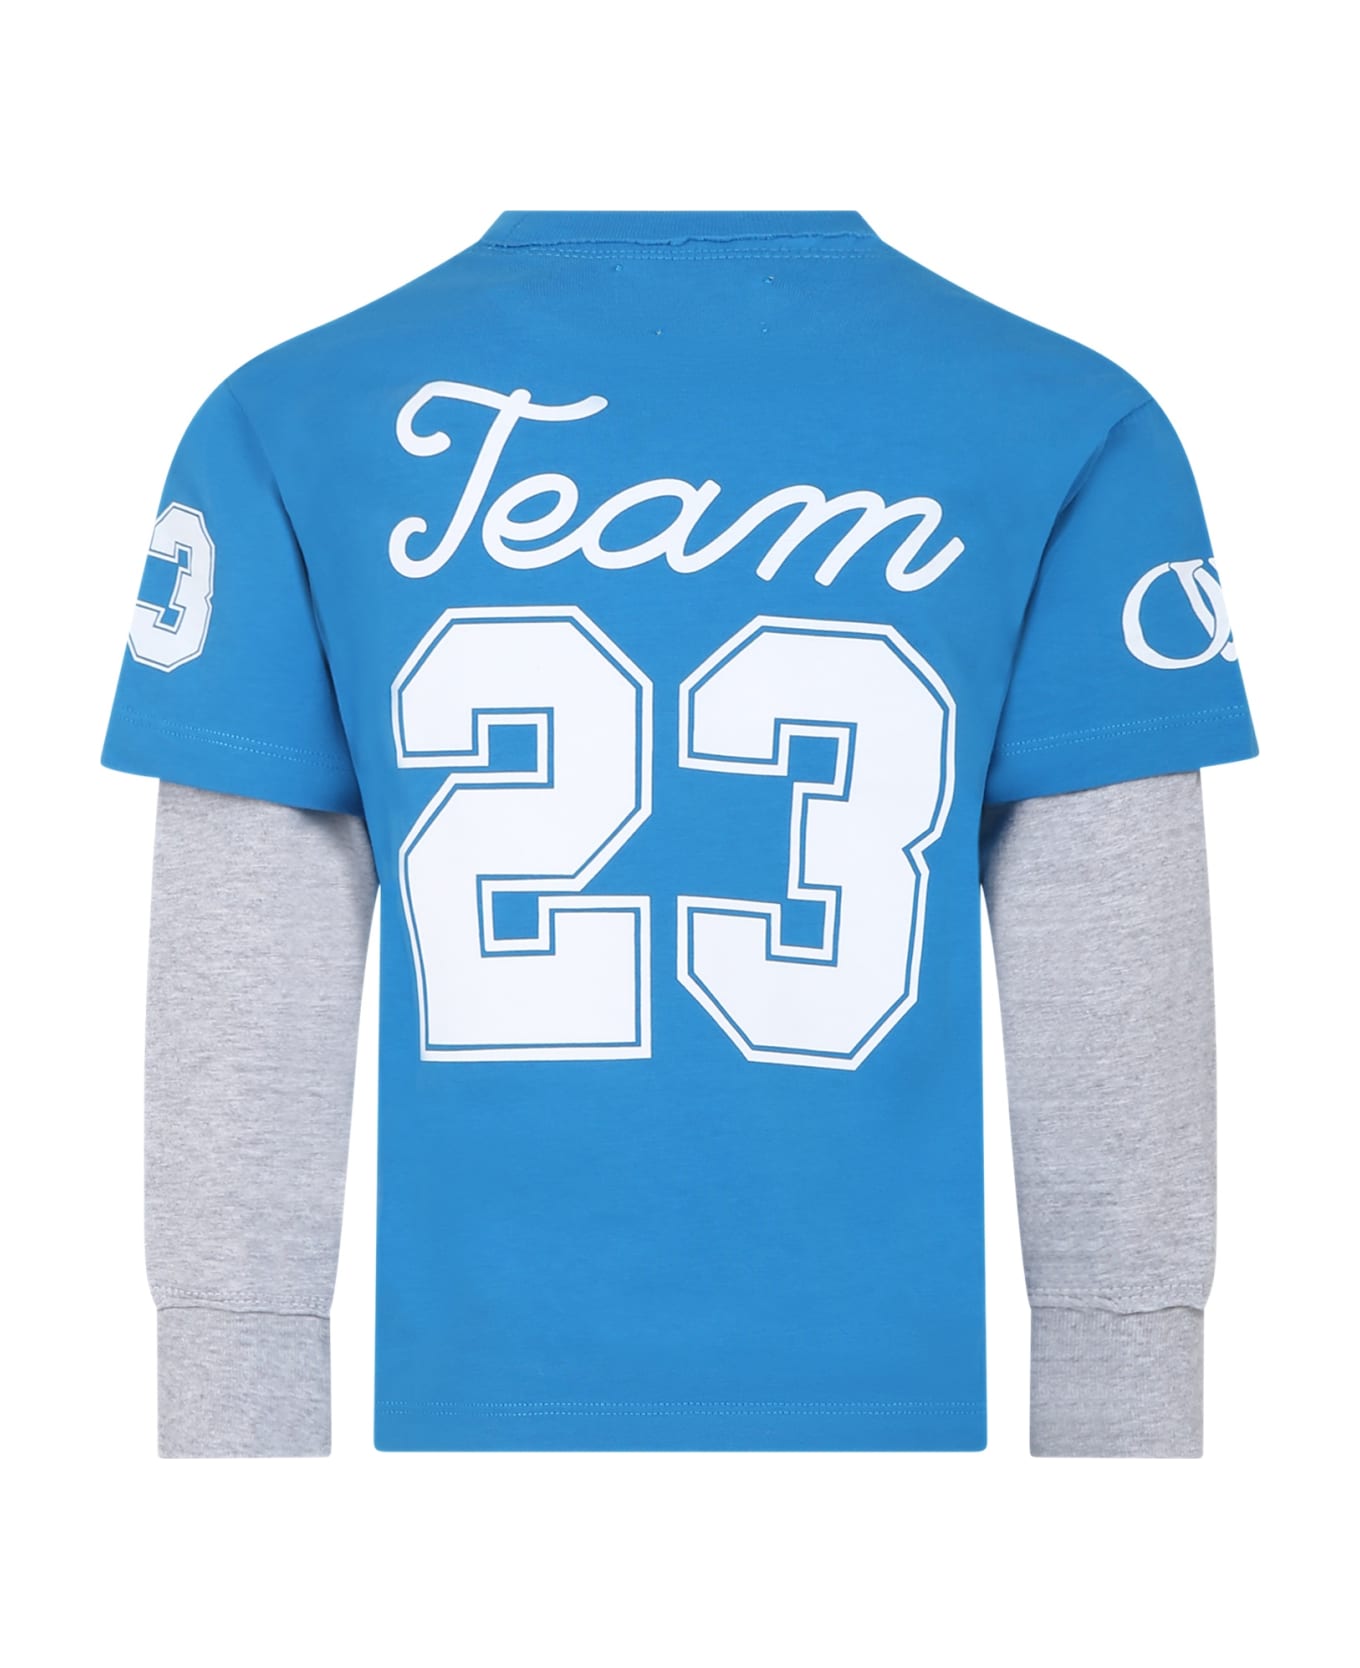 Off-White Light Blue T-shirt For Boy With Logo And Number - Light Blue